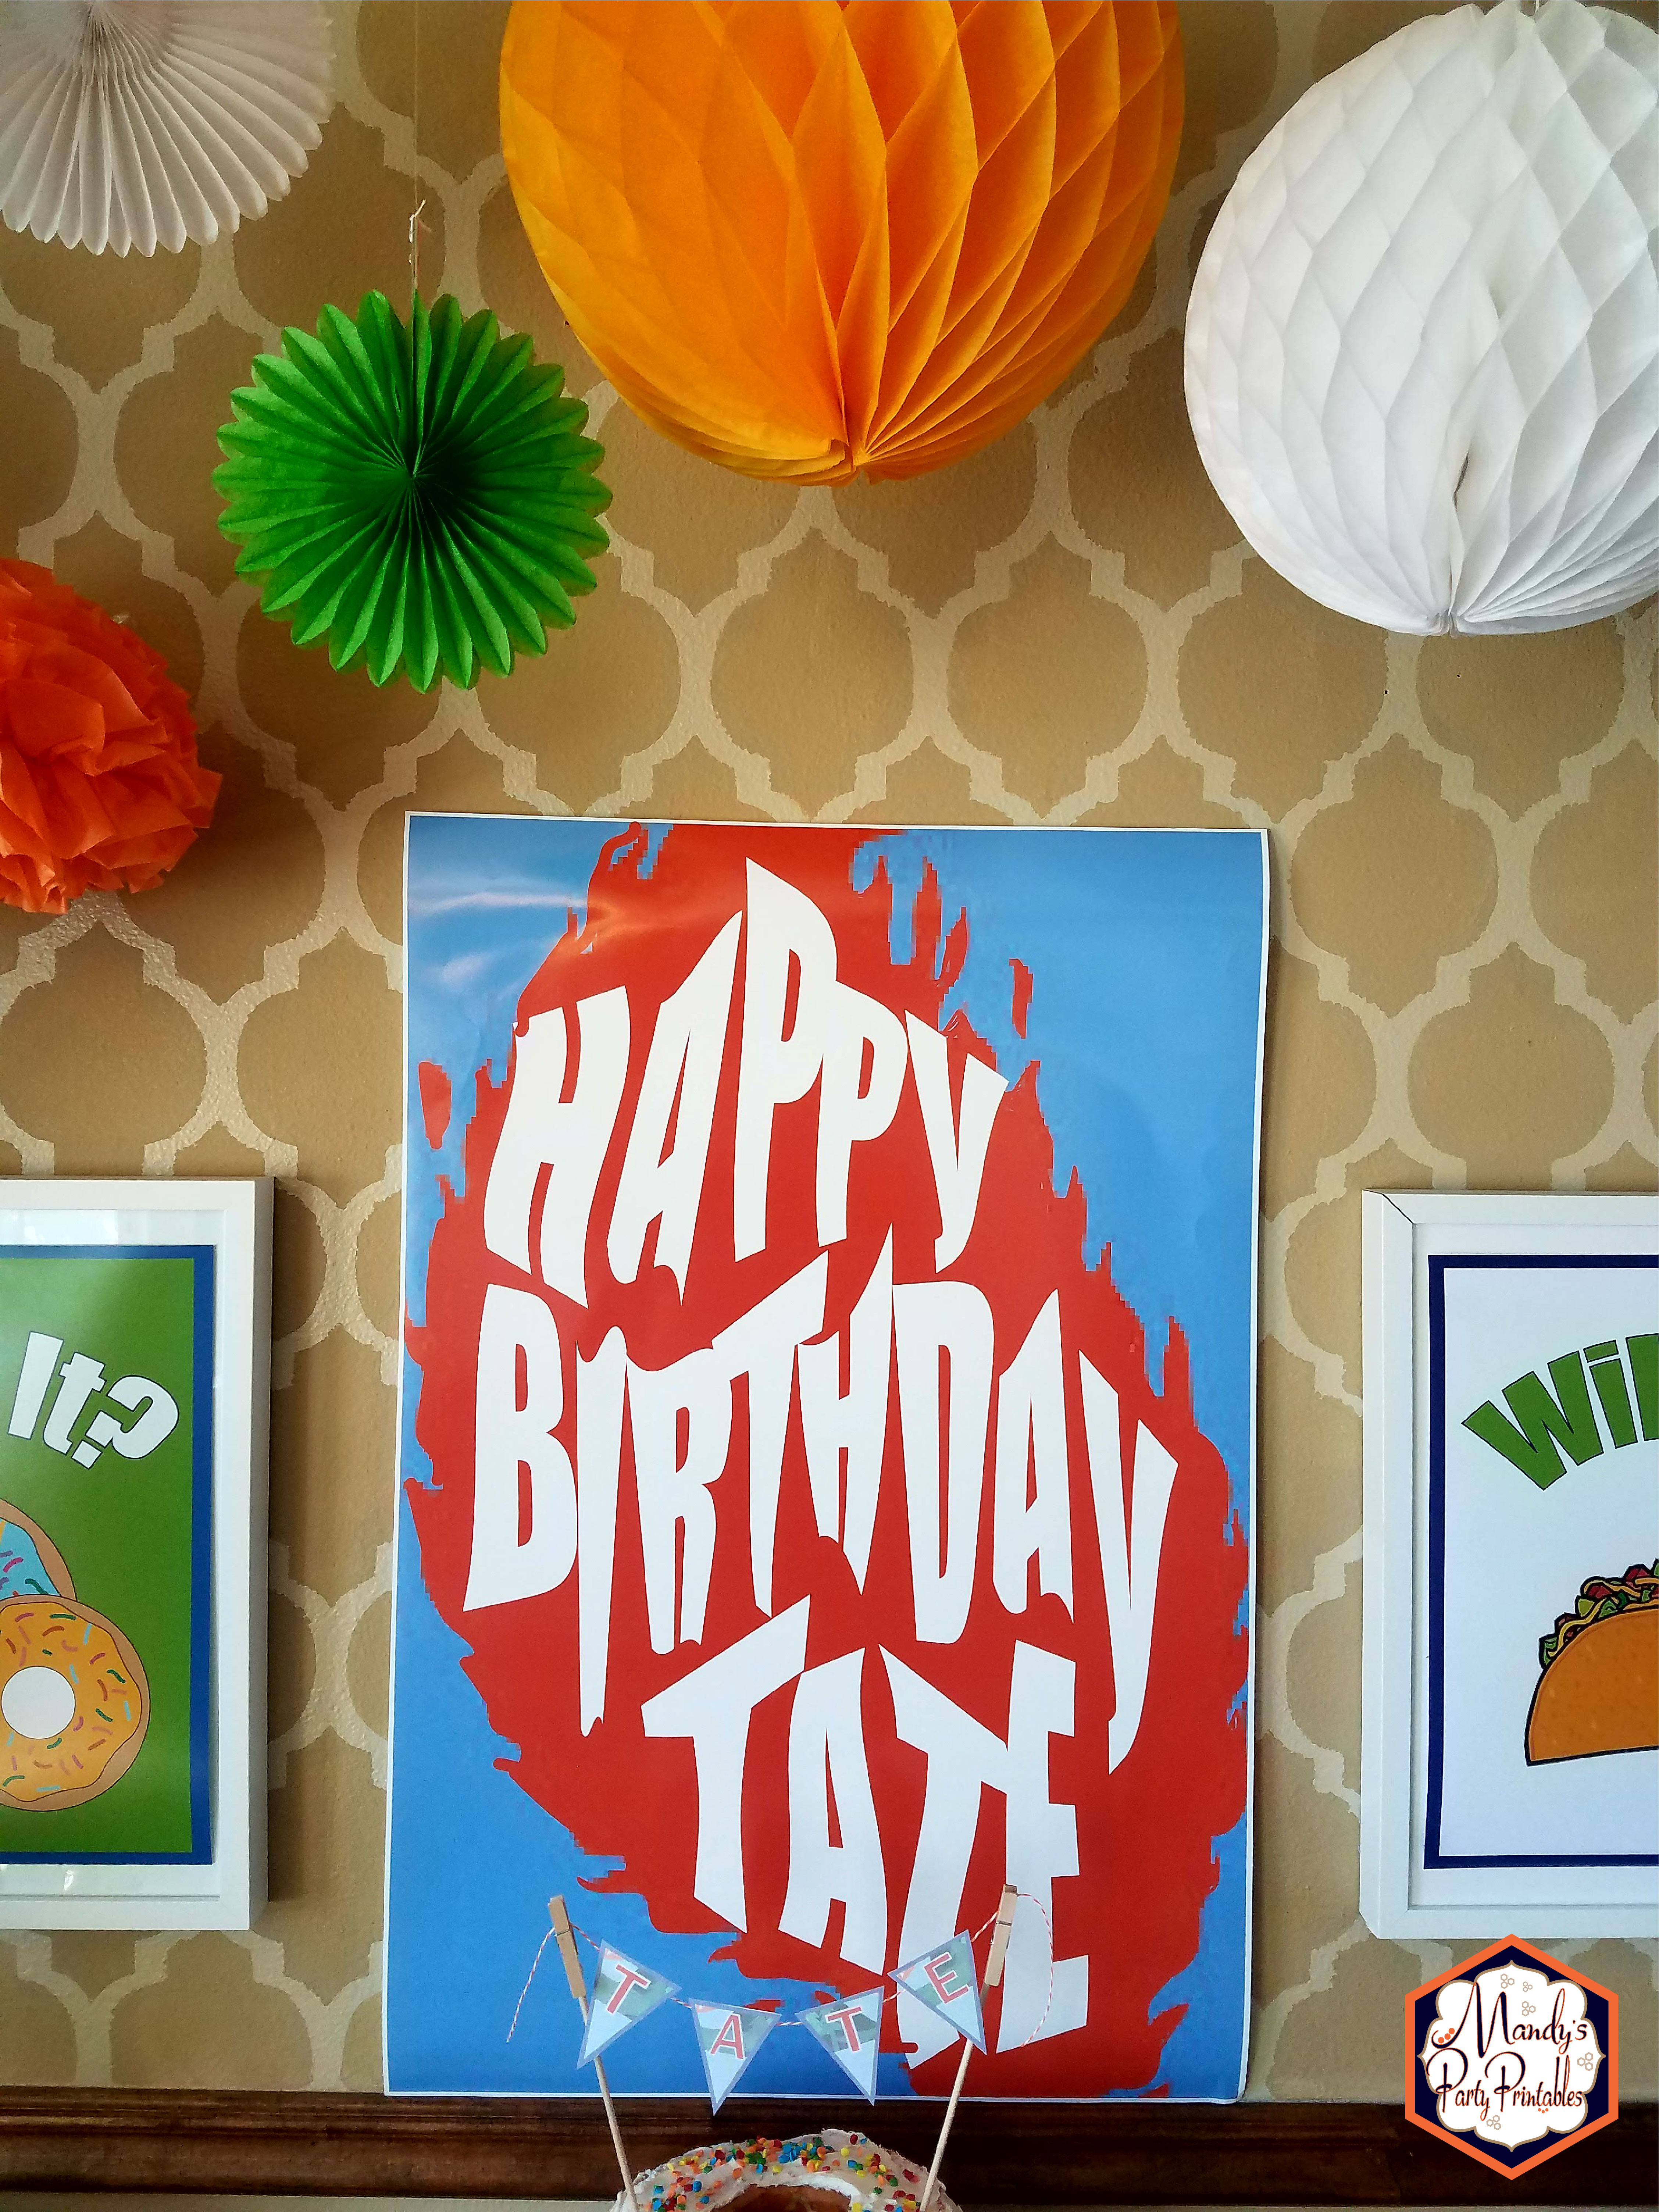 Happy Birthday Party Good Mythical Morning Inspired Birthday Party via Mandy's Party Printables